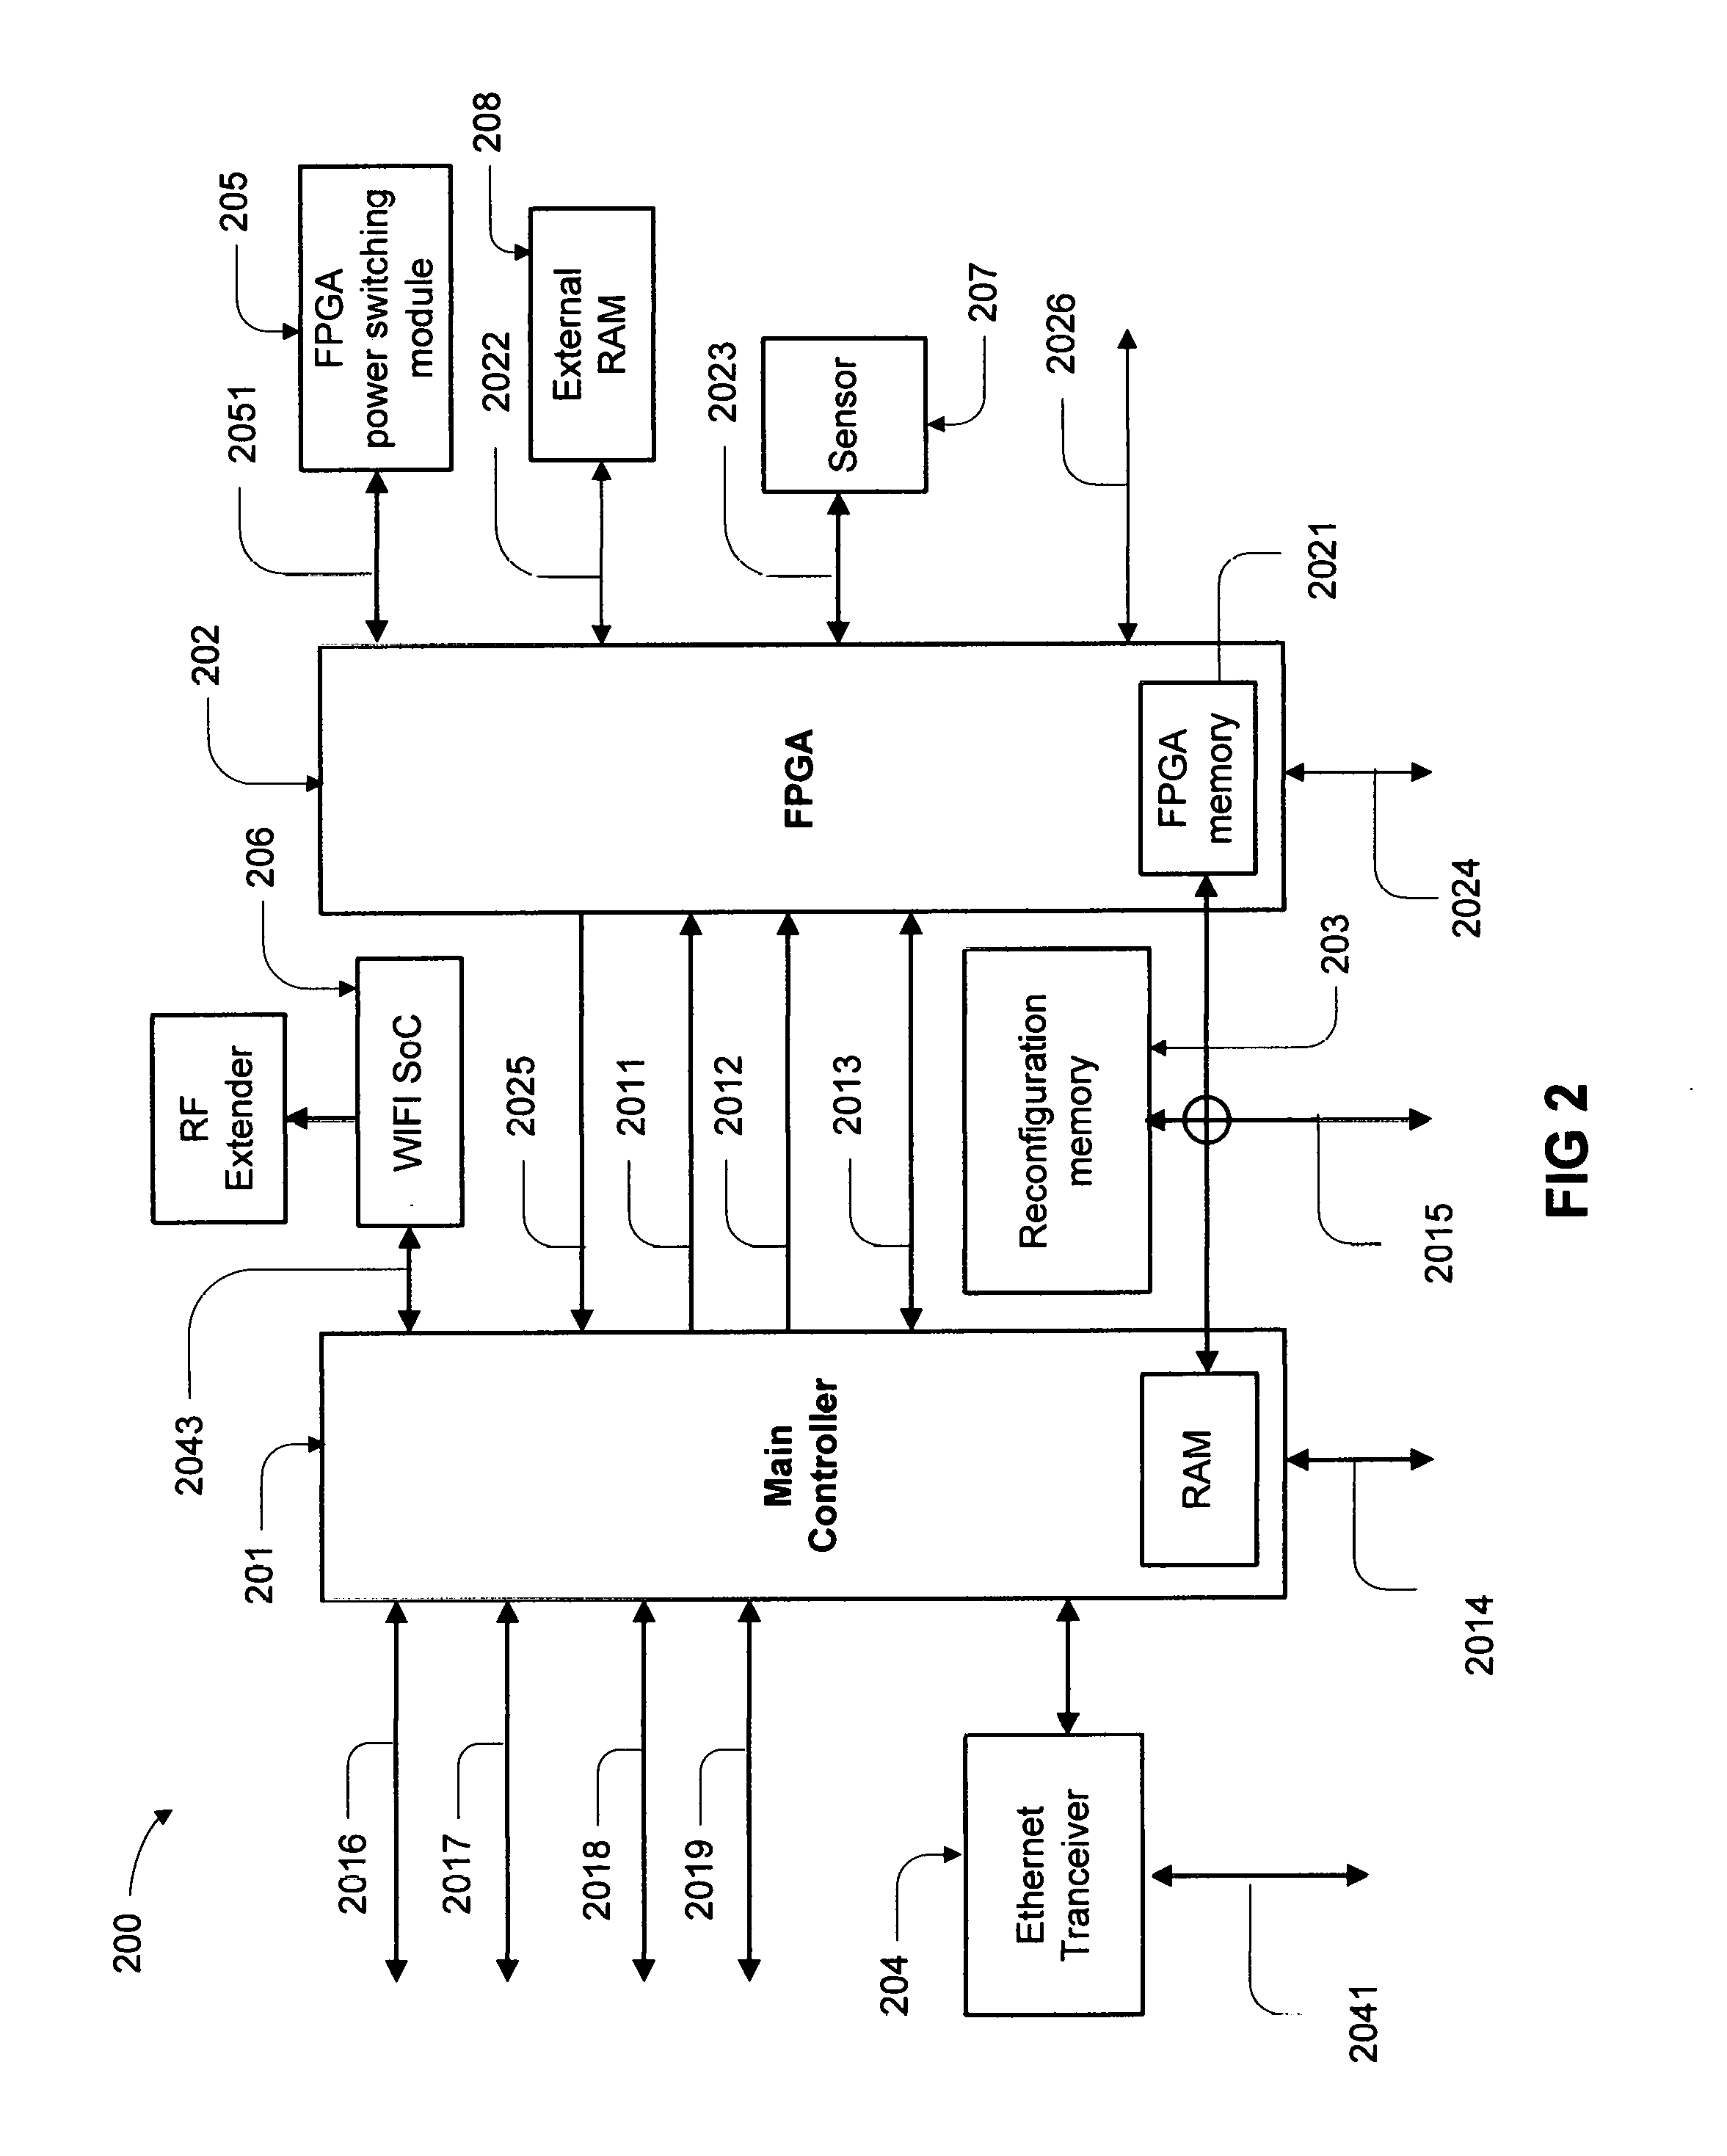 Embedded systems of internet-of-things incorporating a cloud computing service of FPGA reconfiguration